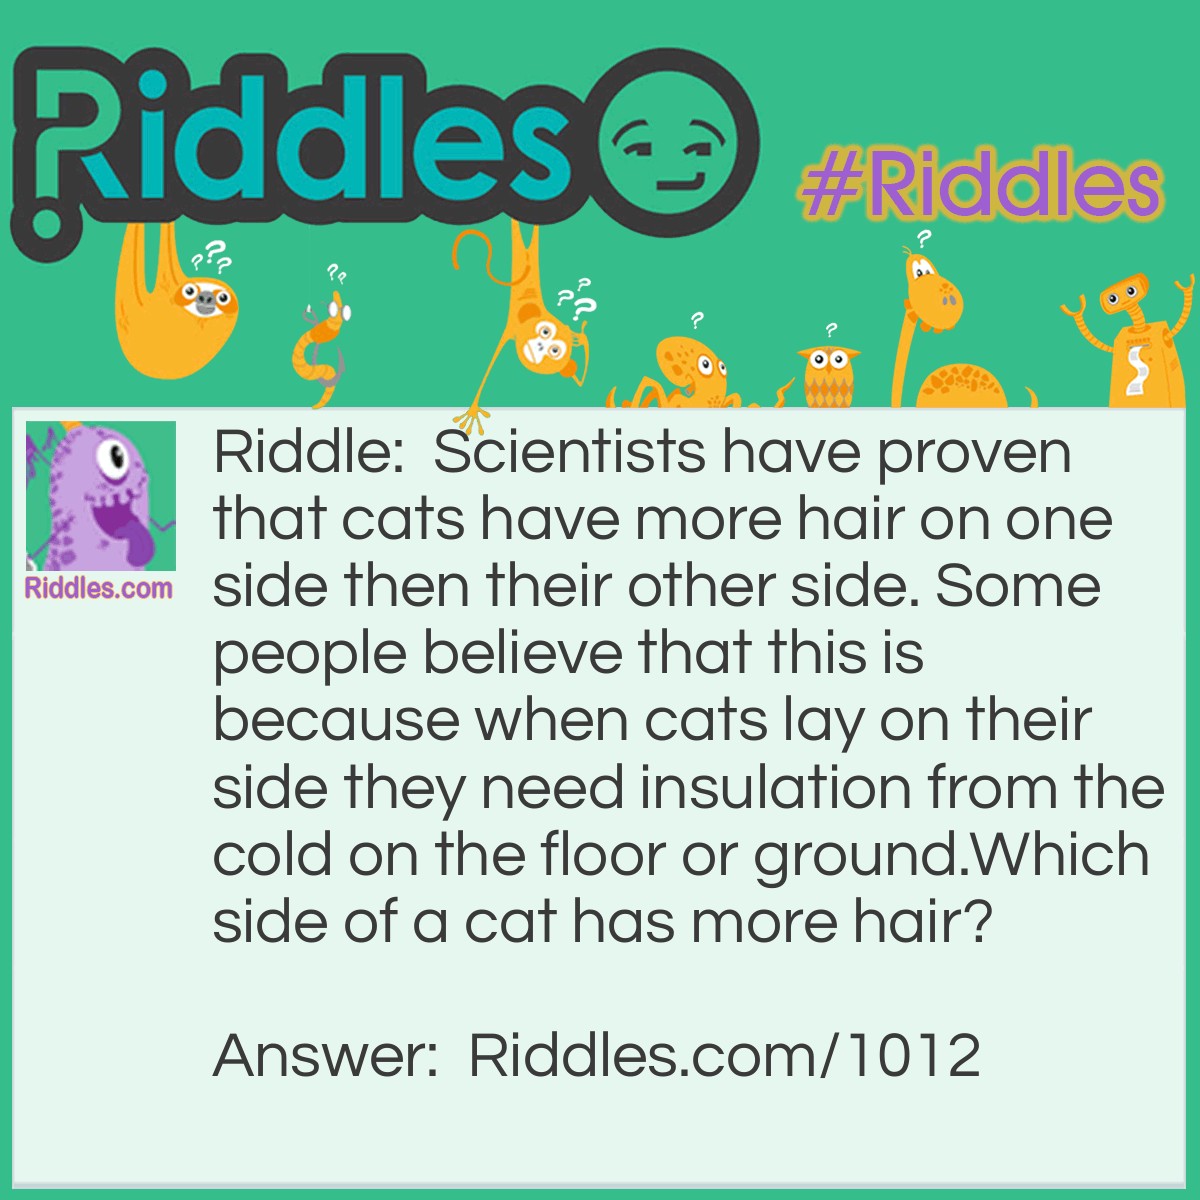 Riddle: Scientists have proven that cats have more hair on one side than on the other side. Some people believe that this is because when cats lay on their sides they need insulation from the cold on the floor or ground. 
Which side of a cat has more hair? Answer: The outside of the Cat of course!